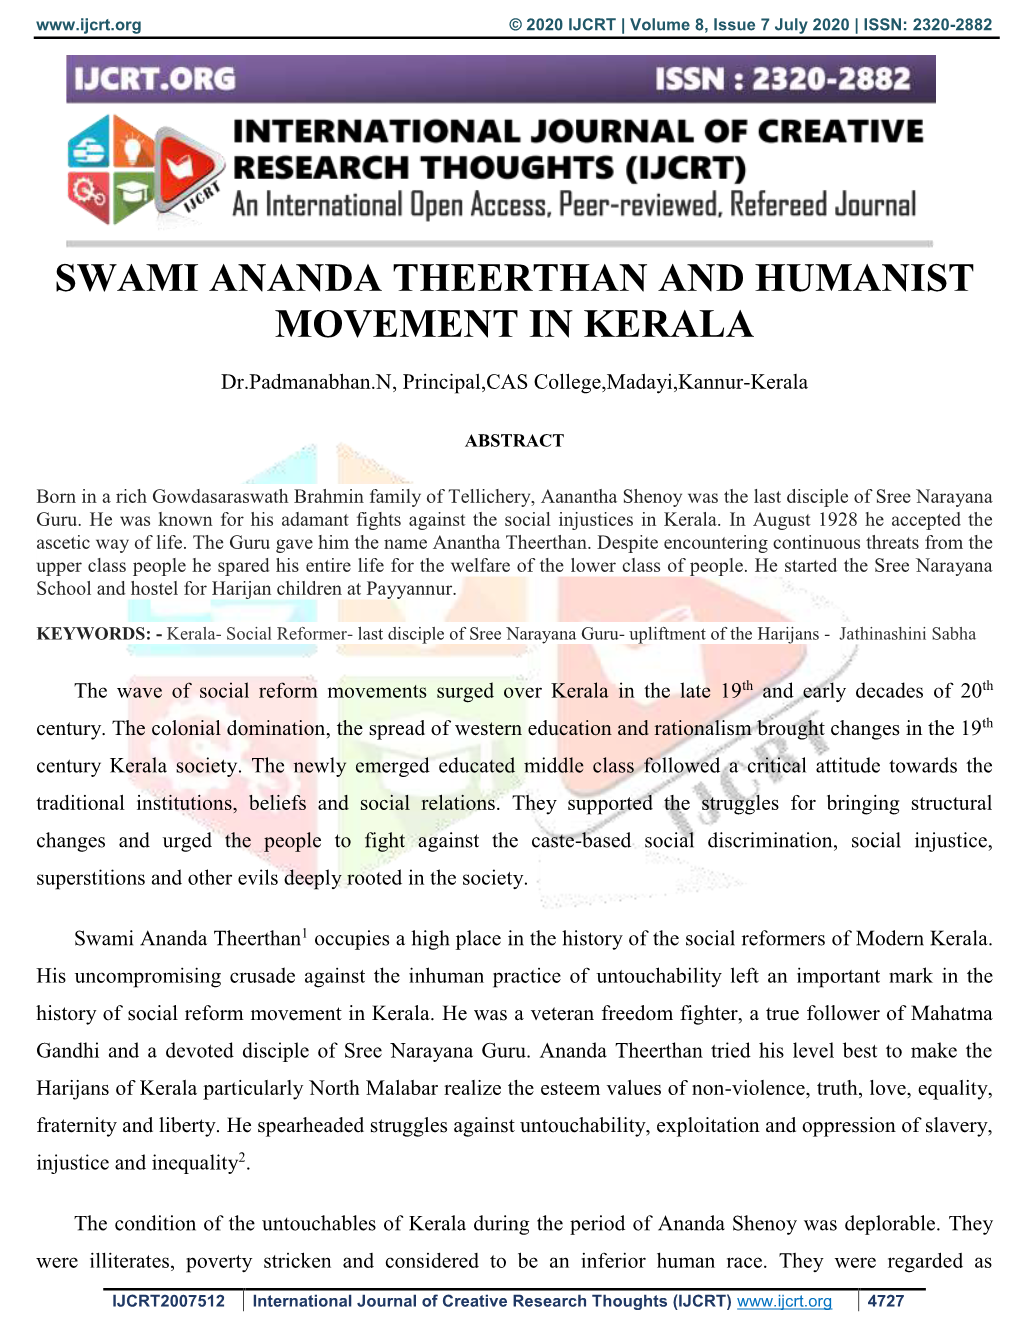 Swami Ananda Theerthan and Humanist Movement in Kerala